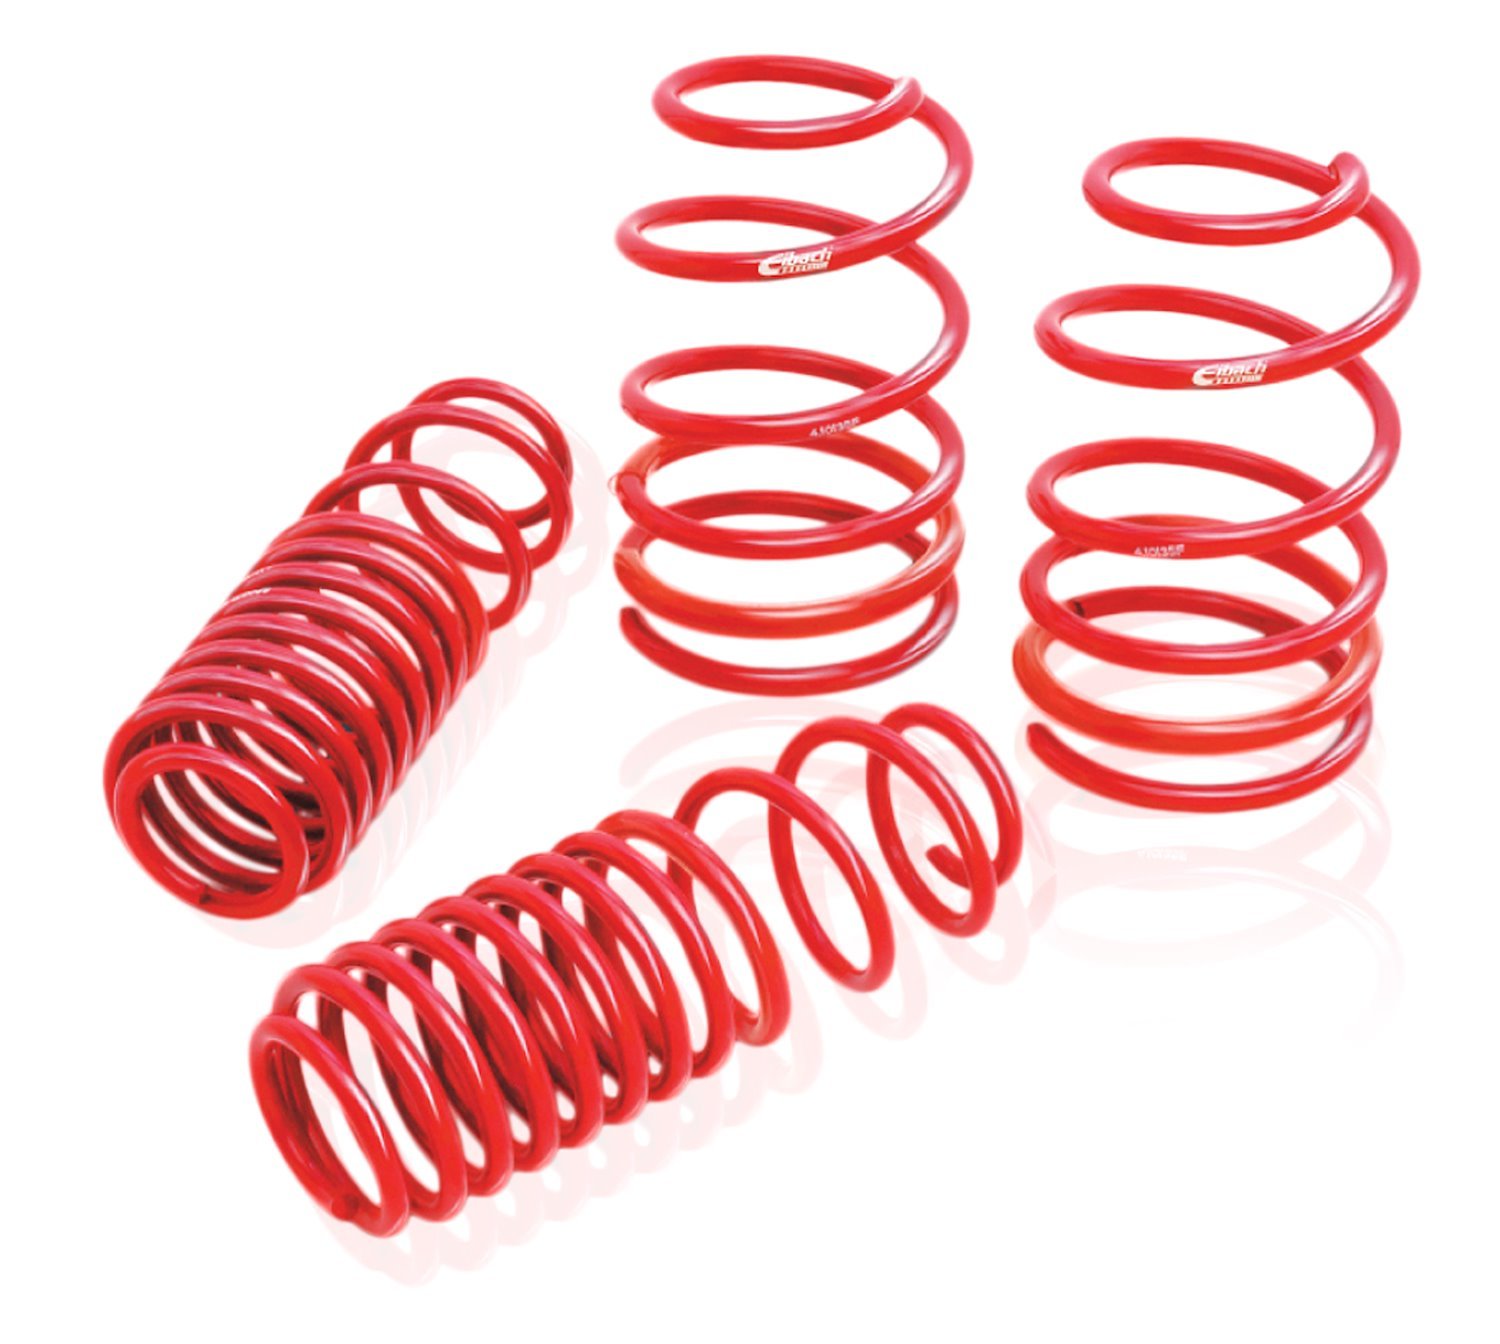 4.11535 Sportline Extreme Lowering Springs 2007-10 Shelby GT500 Coupe - 1.7" Front/2.2" Rear Drop